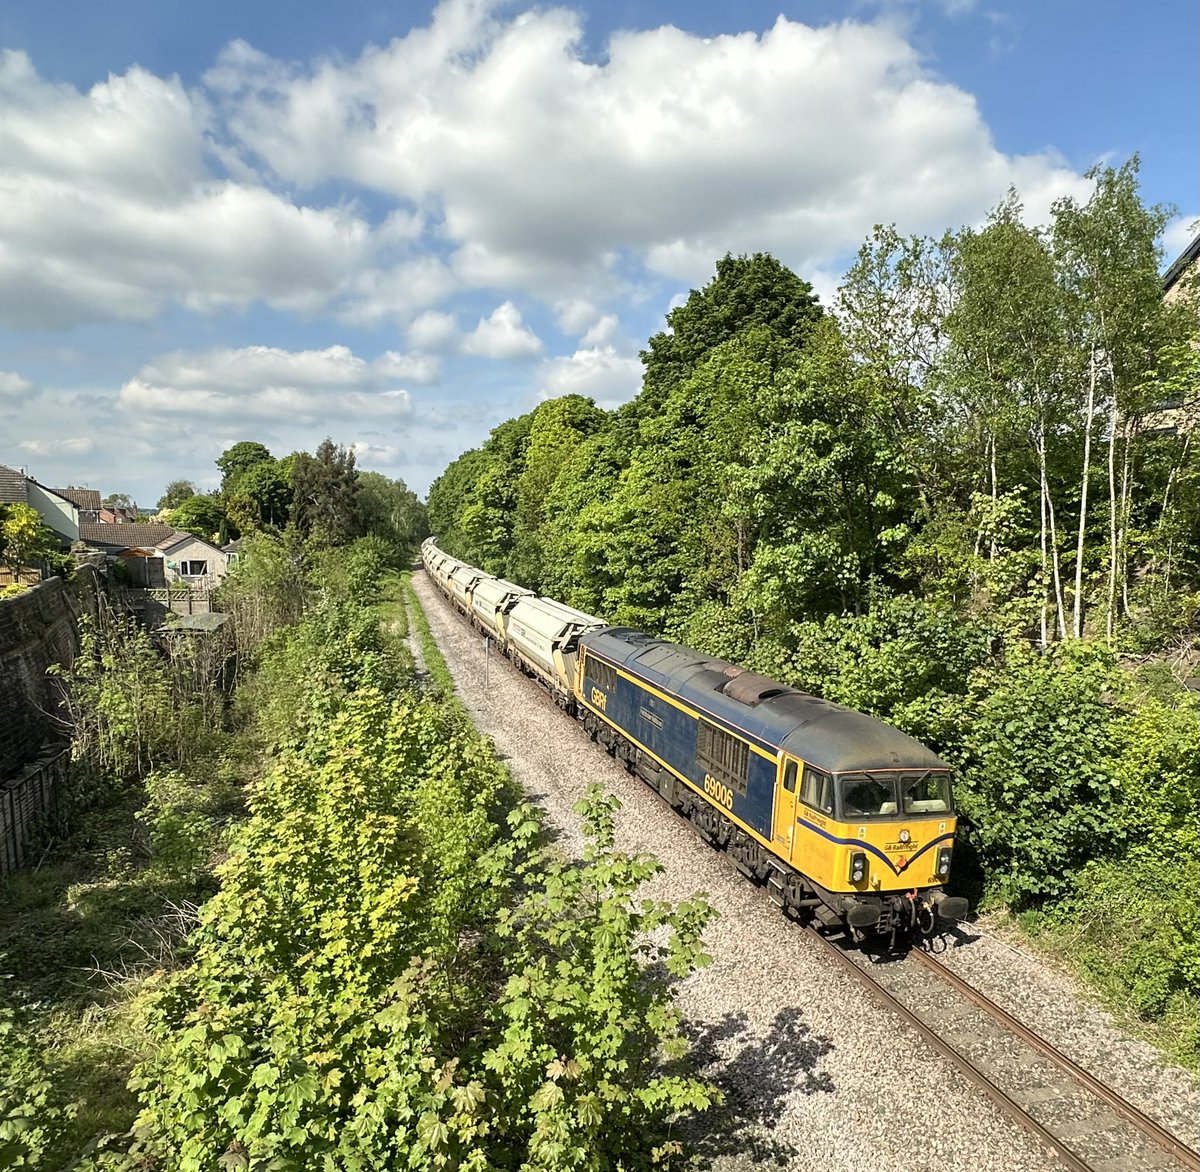 Brushing past the closing in greenery 69006 at Walton on todays 6E86 Middleton - Monk Bretton #class69